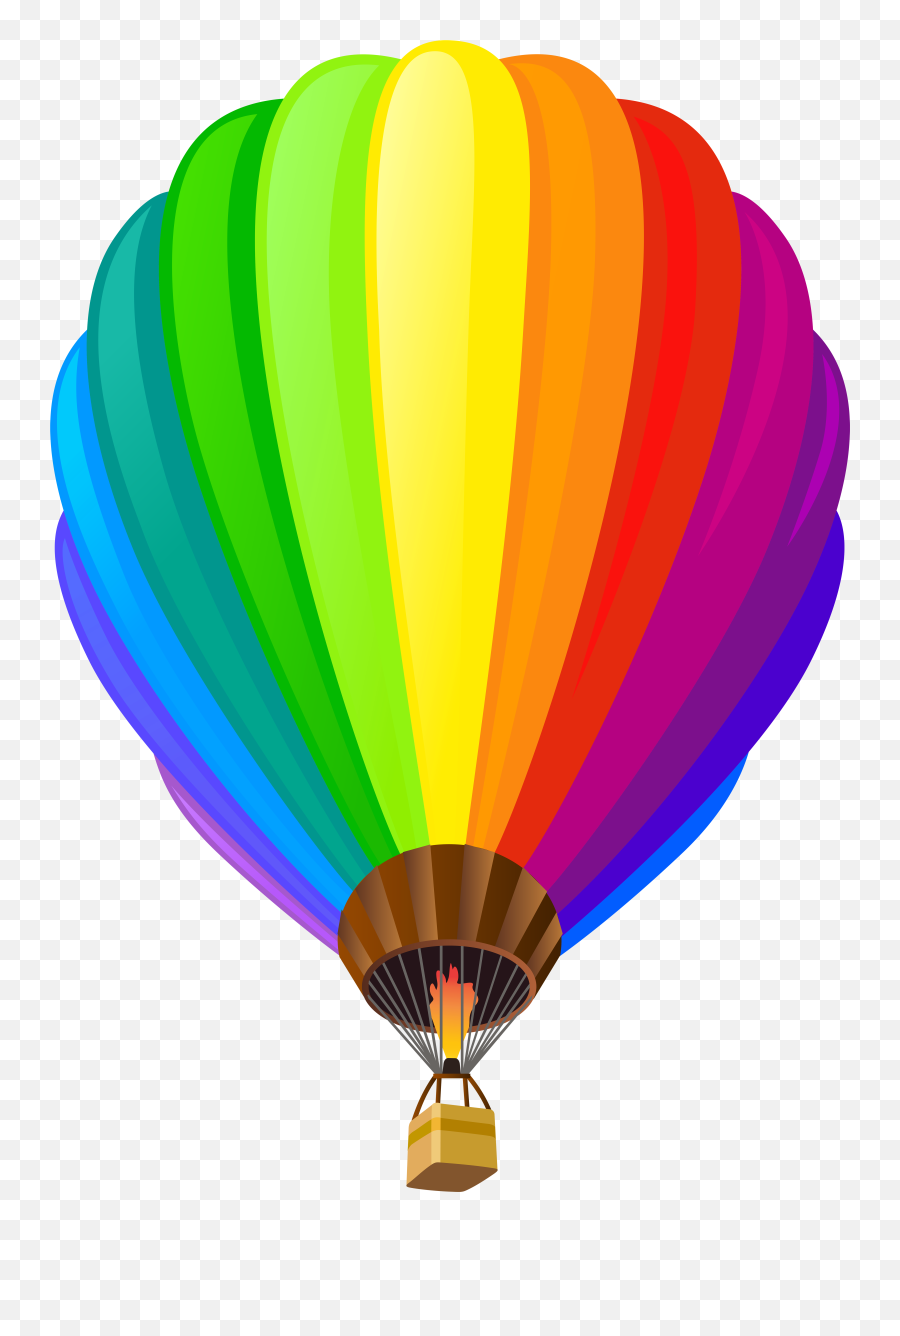 Download Hot Air Balloon Transparent Png Clip Art Image Is Background